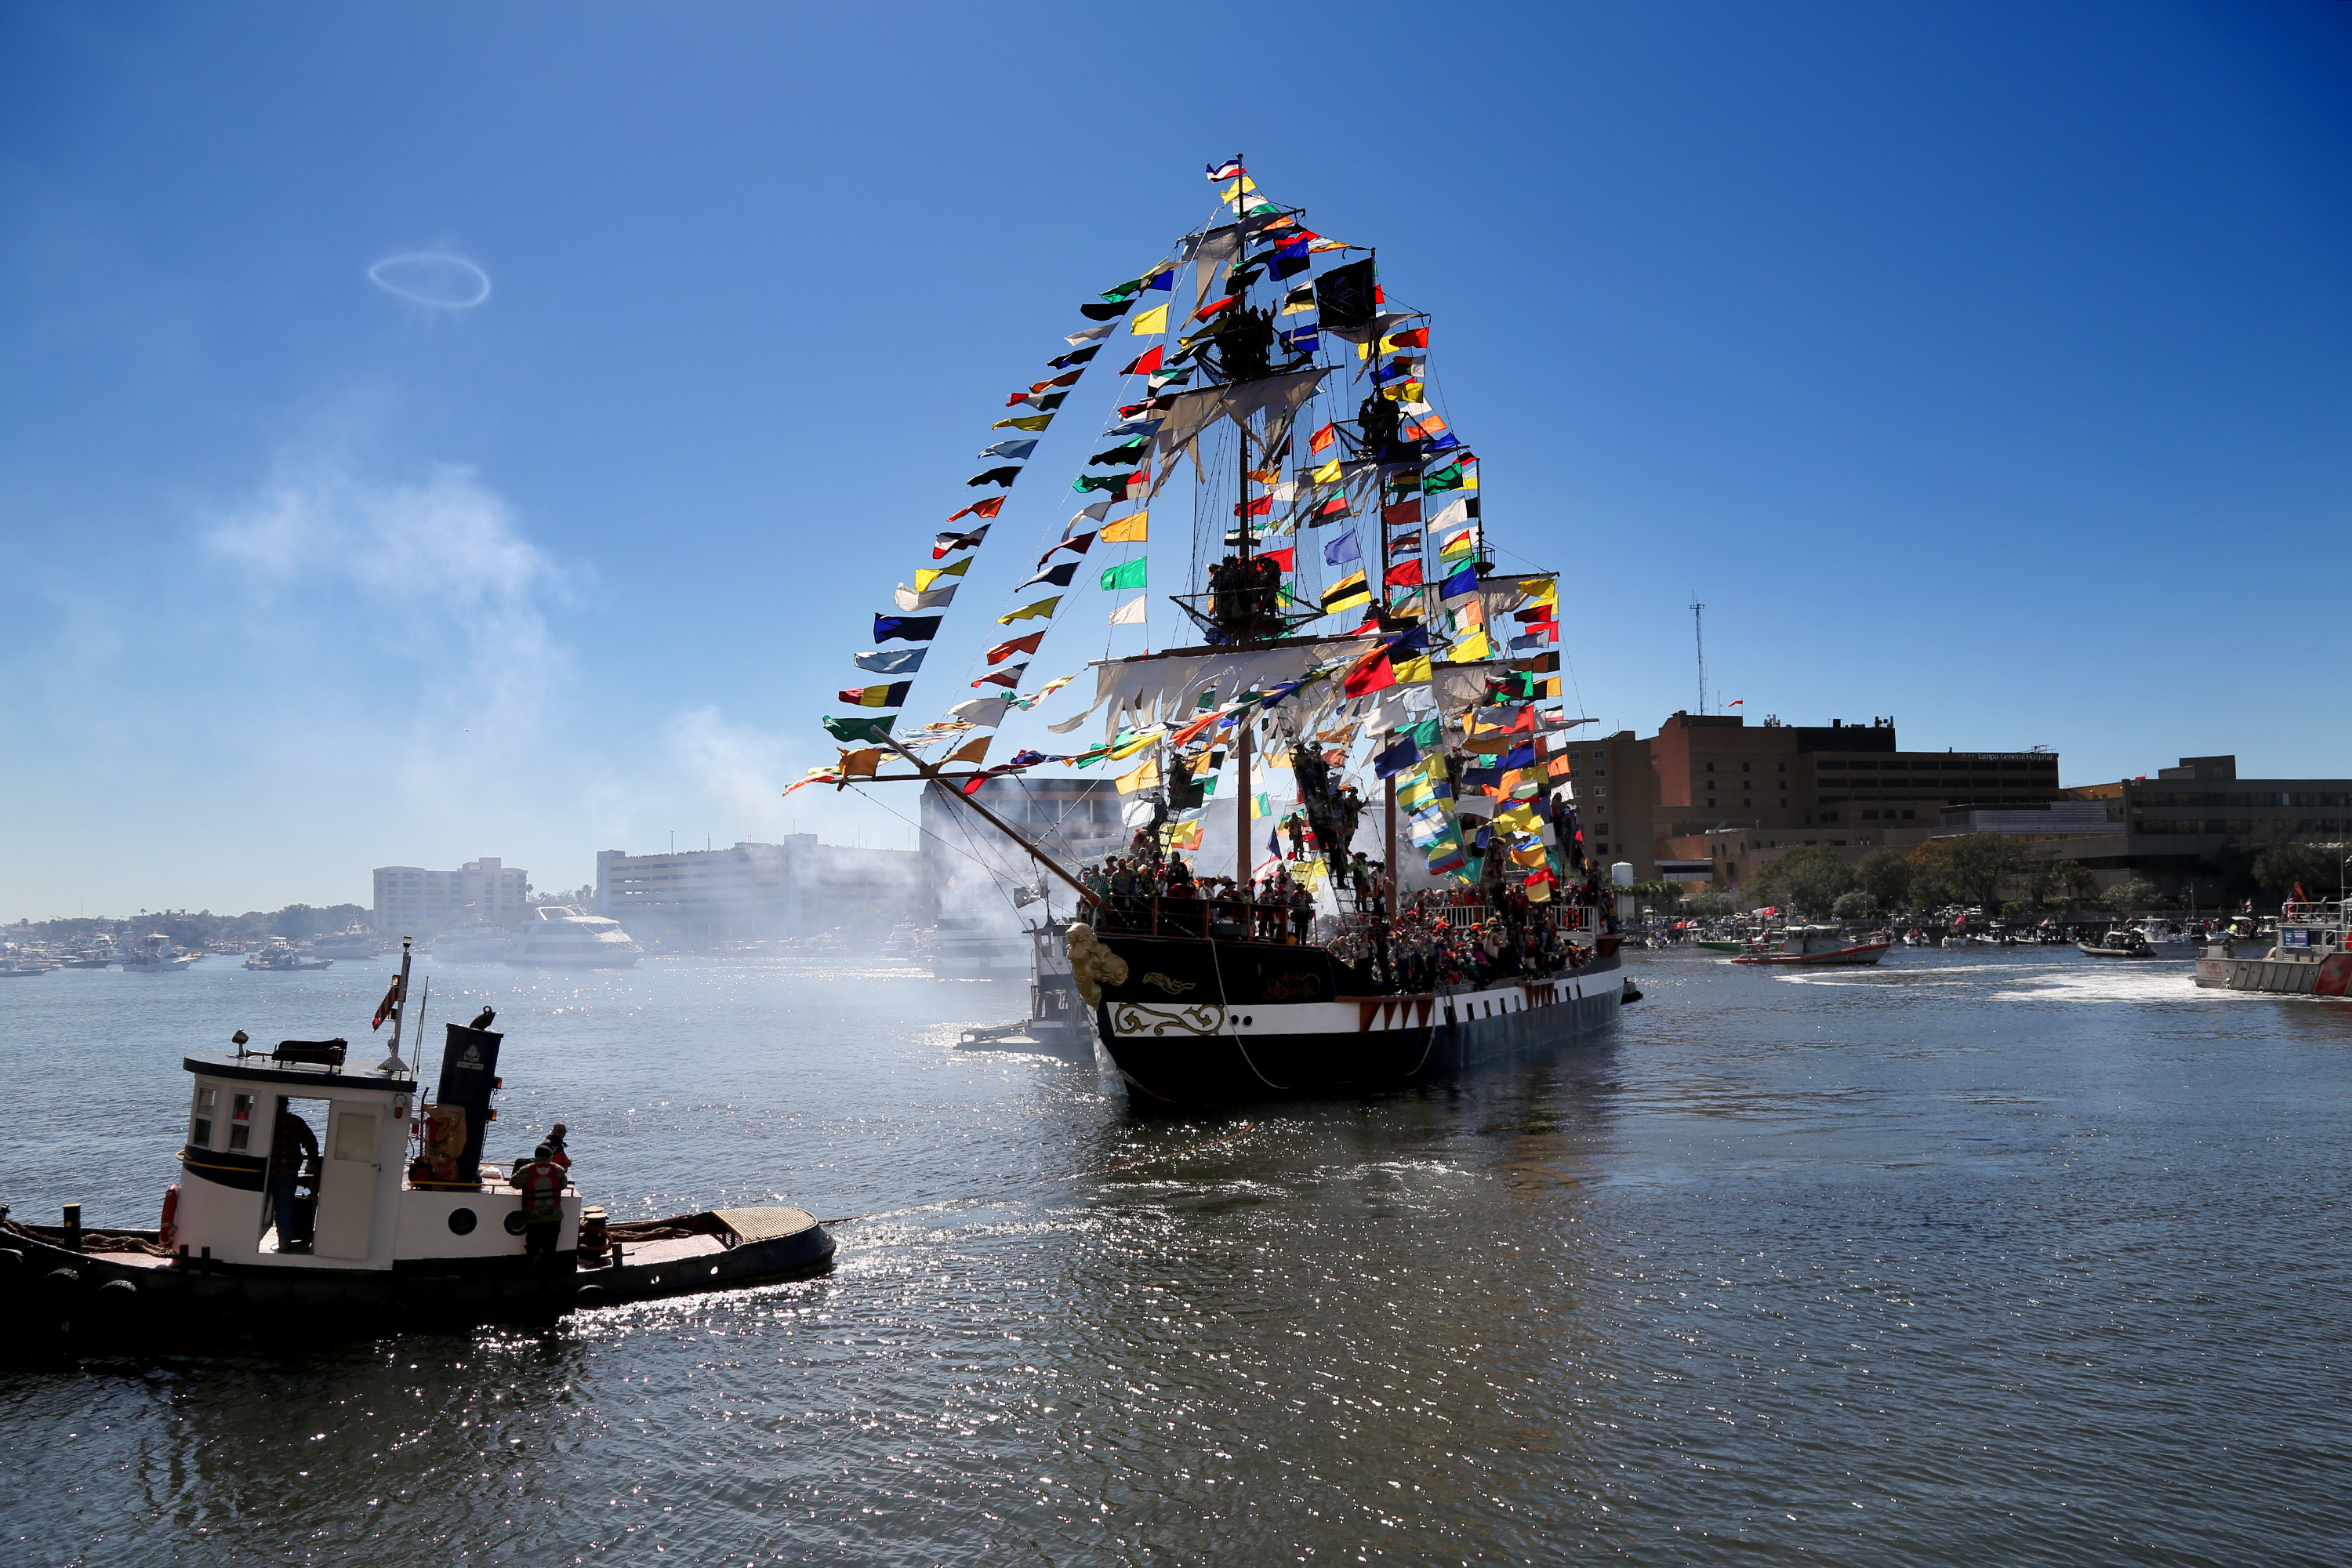 Jose Gasparilla pirate ship set to light up the sky with lasers in honor of  Super Bowl 55